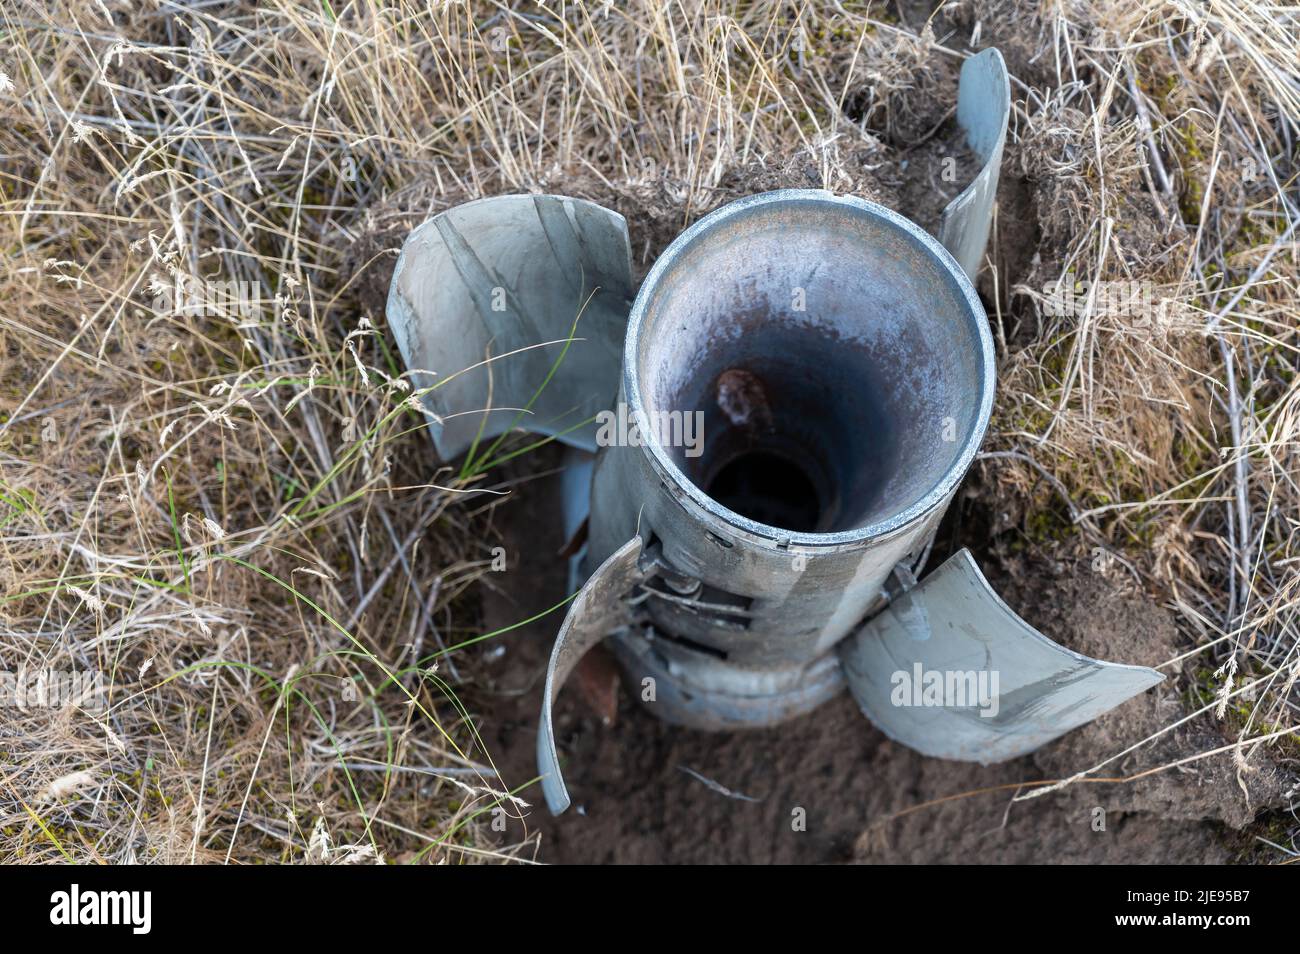 BM-30 Smerch missile stuck in the ground. A rocket was fired by the Russian army at a Ukrainian city. Russian war against Ukraine. Genocide of the Ukr Stock Photo